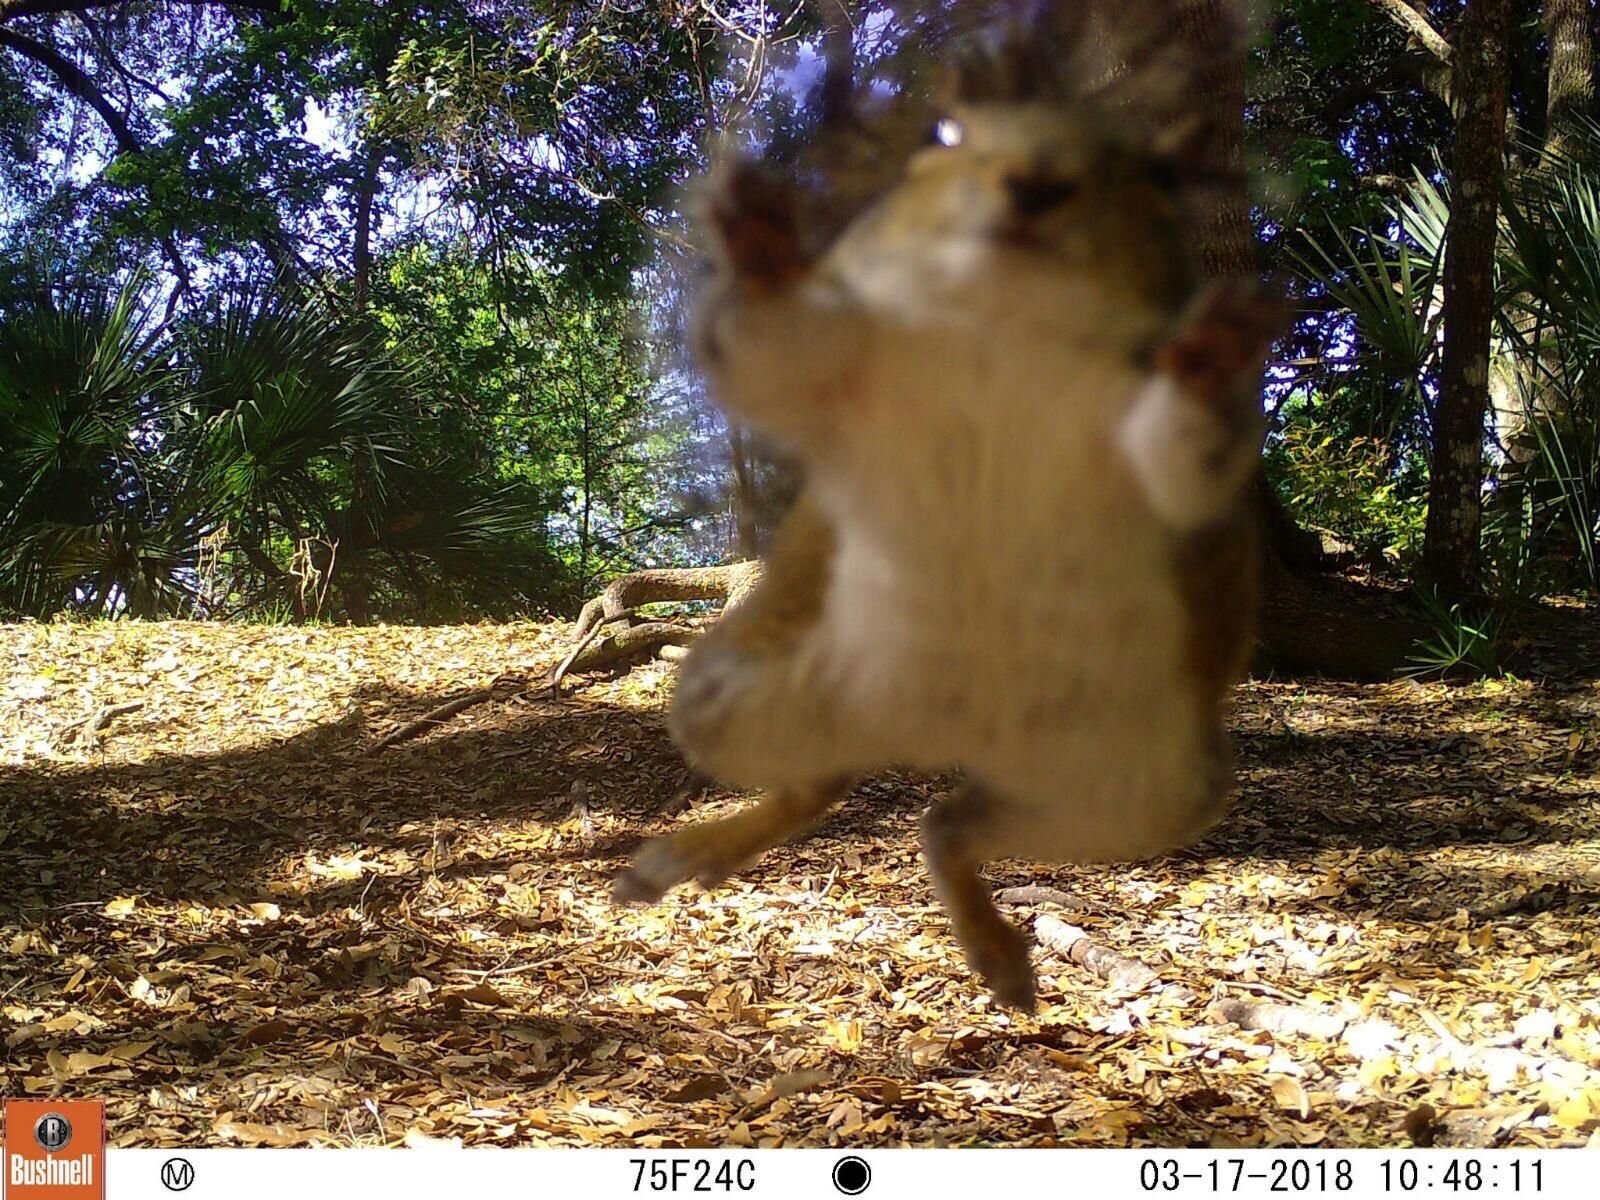 Got the best surprise checking the outdoors cam earlier this year